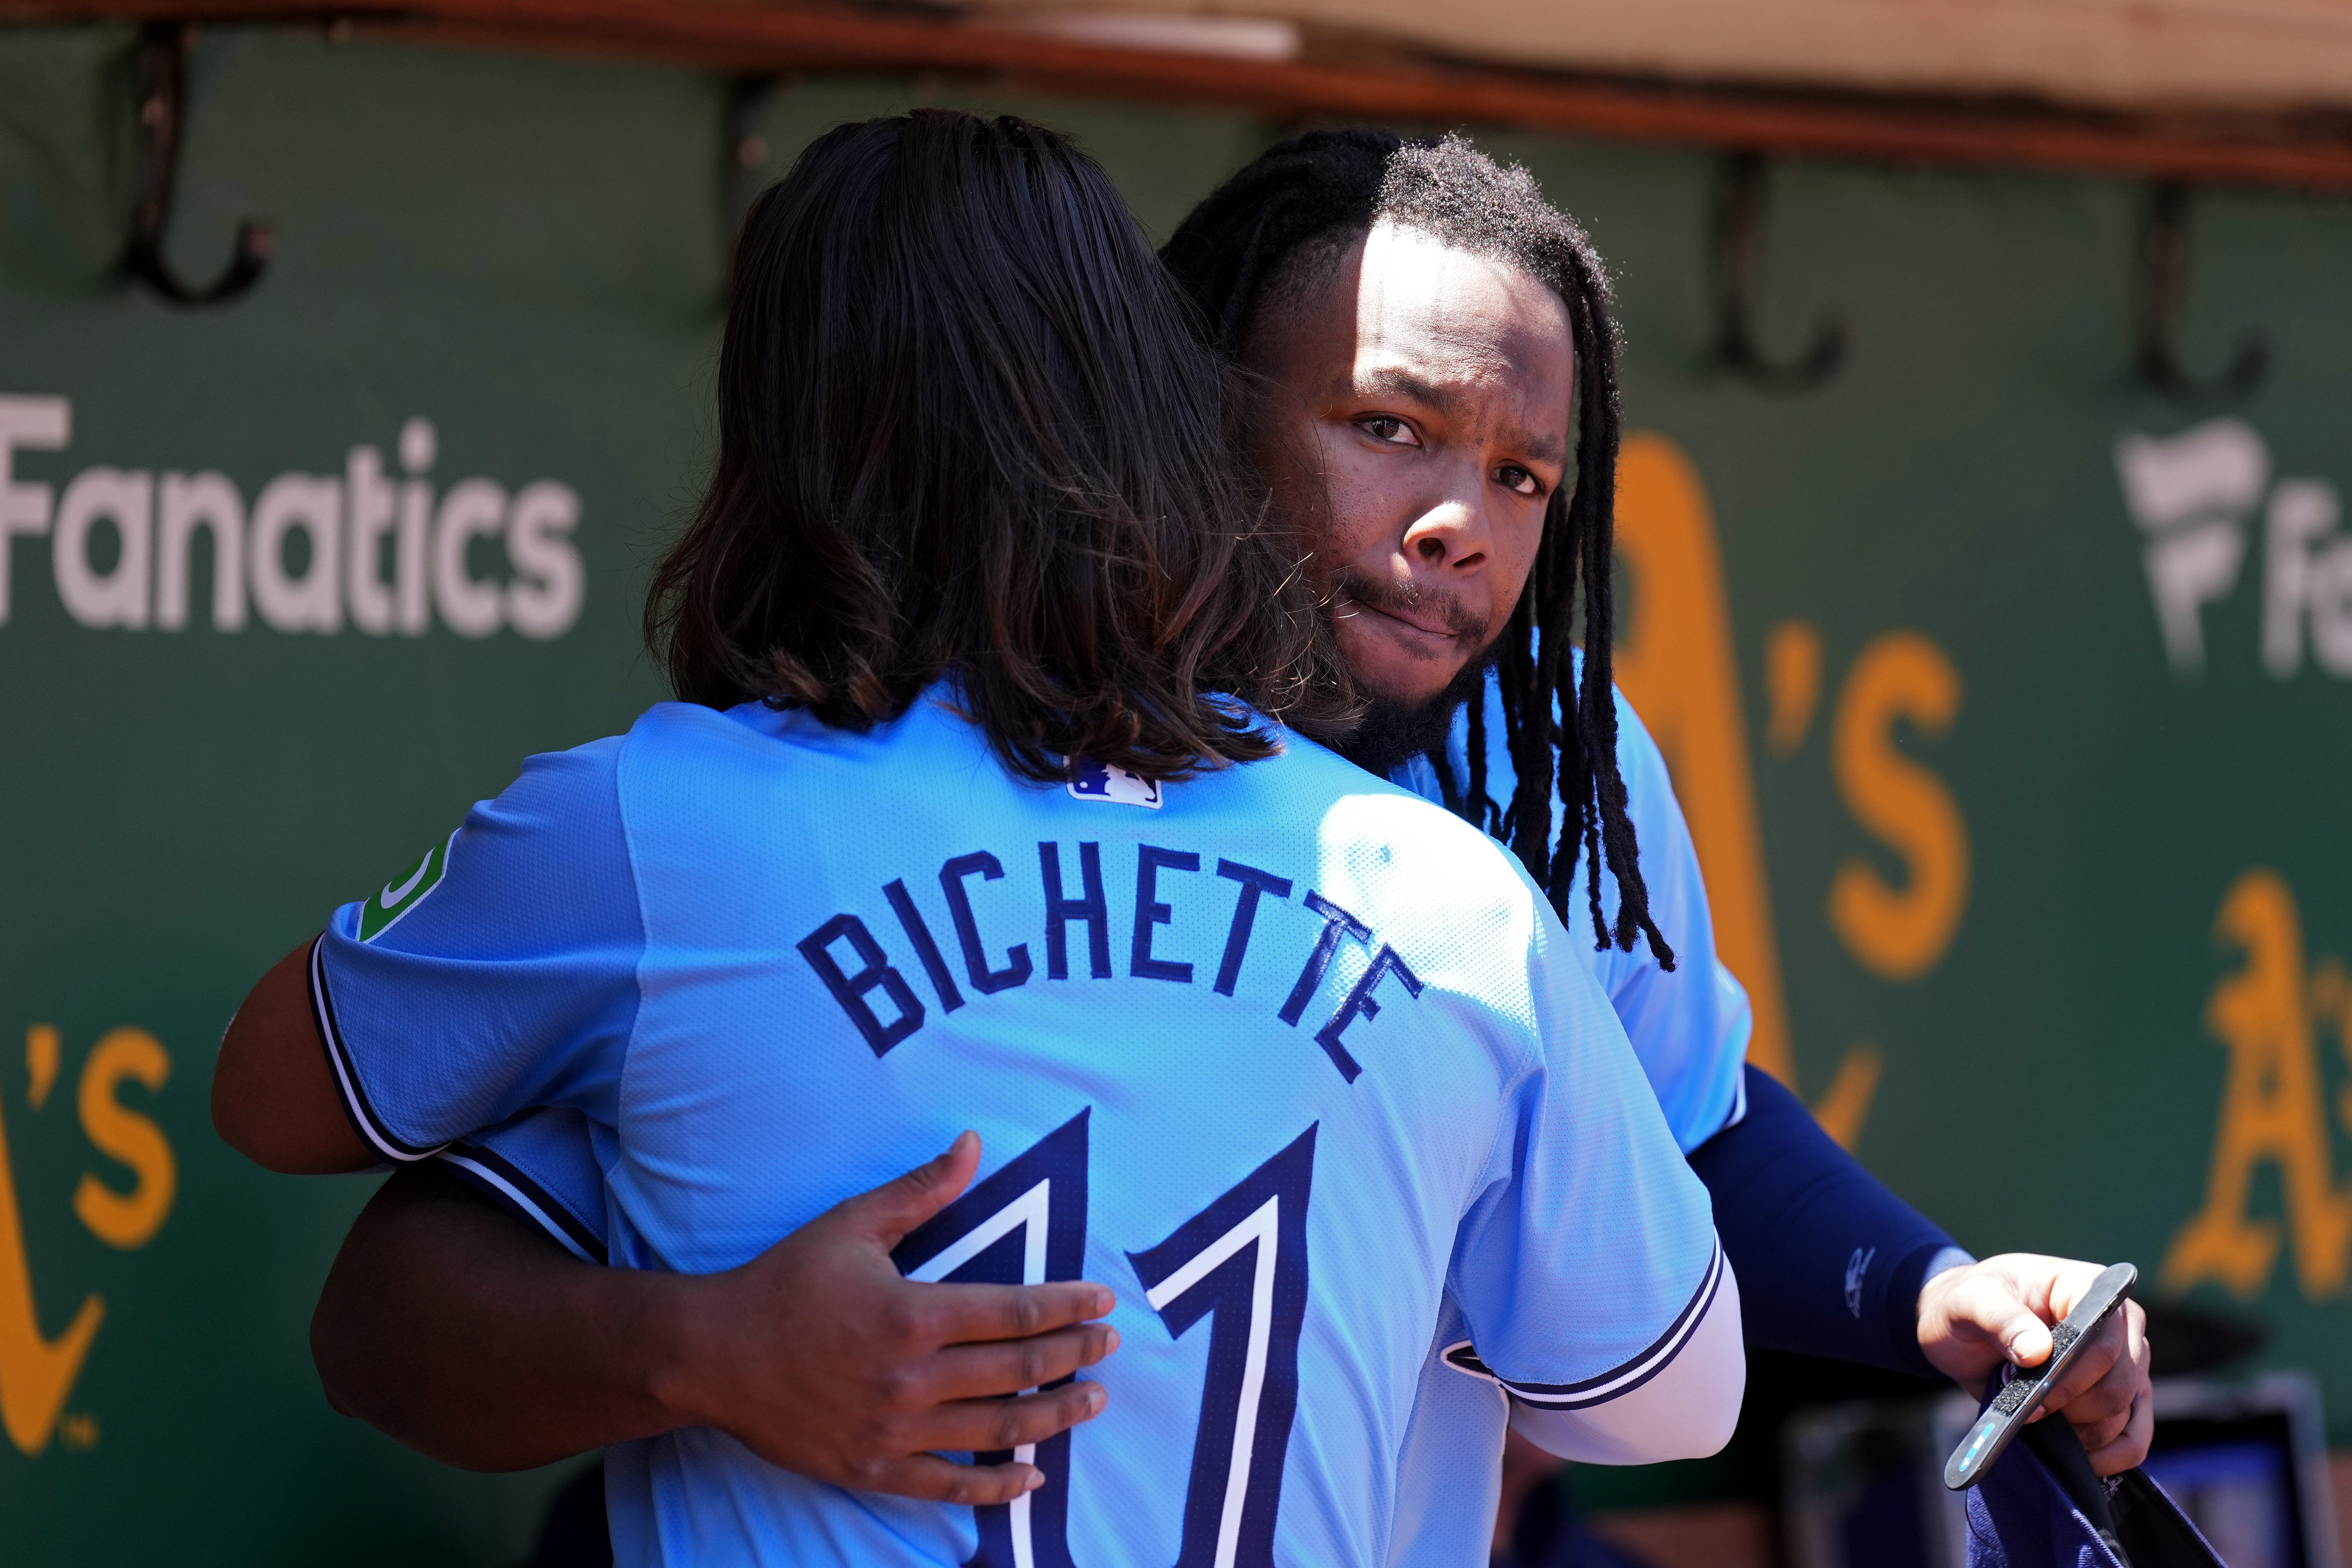 Toronto Blue Jays hope to be contenders again in 2025 with Vladimir Guerrero Jr. and Bo Bichette leading the way. (Photo Credit: Imagn)